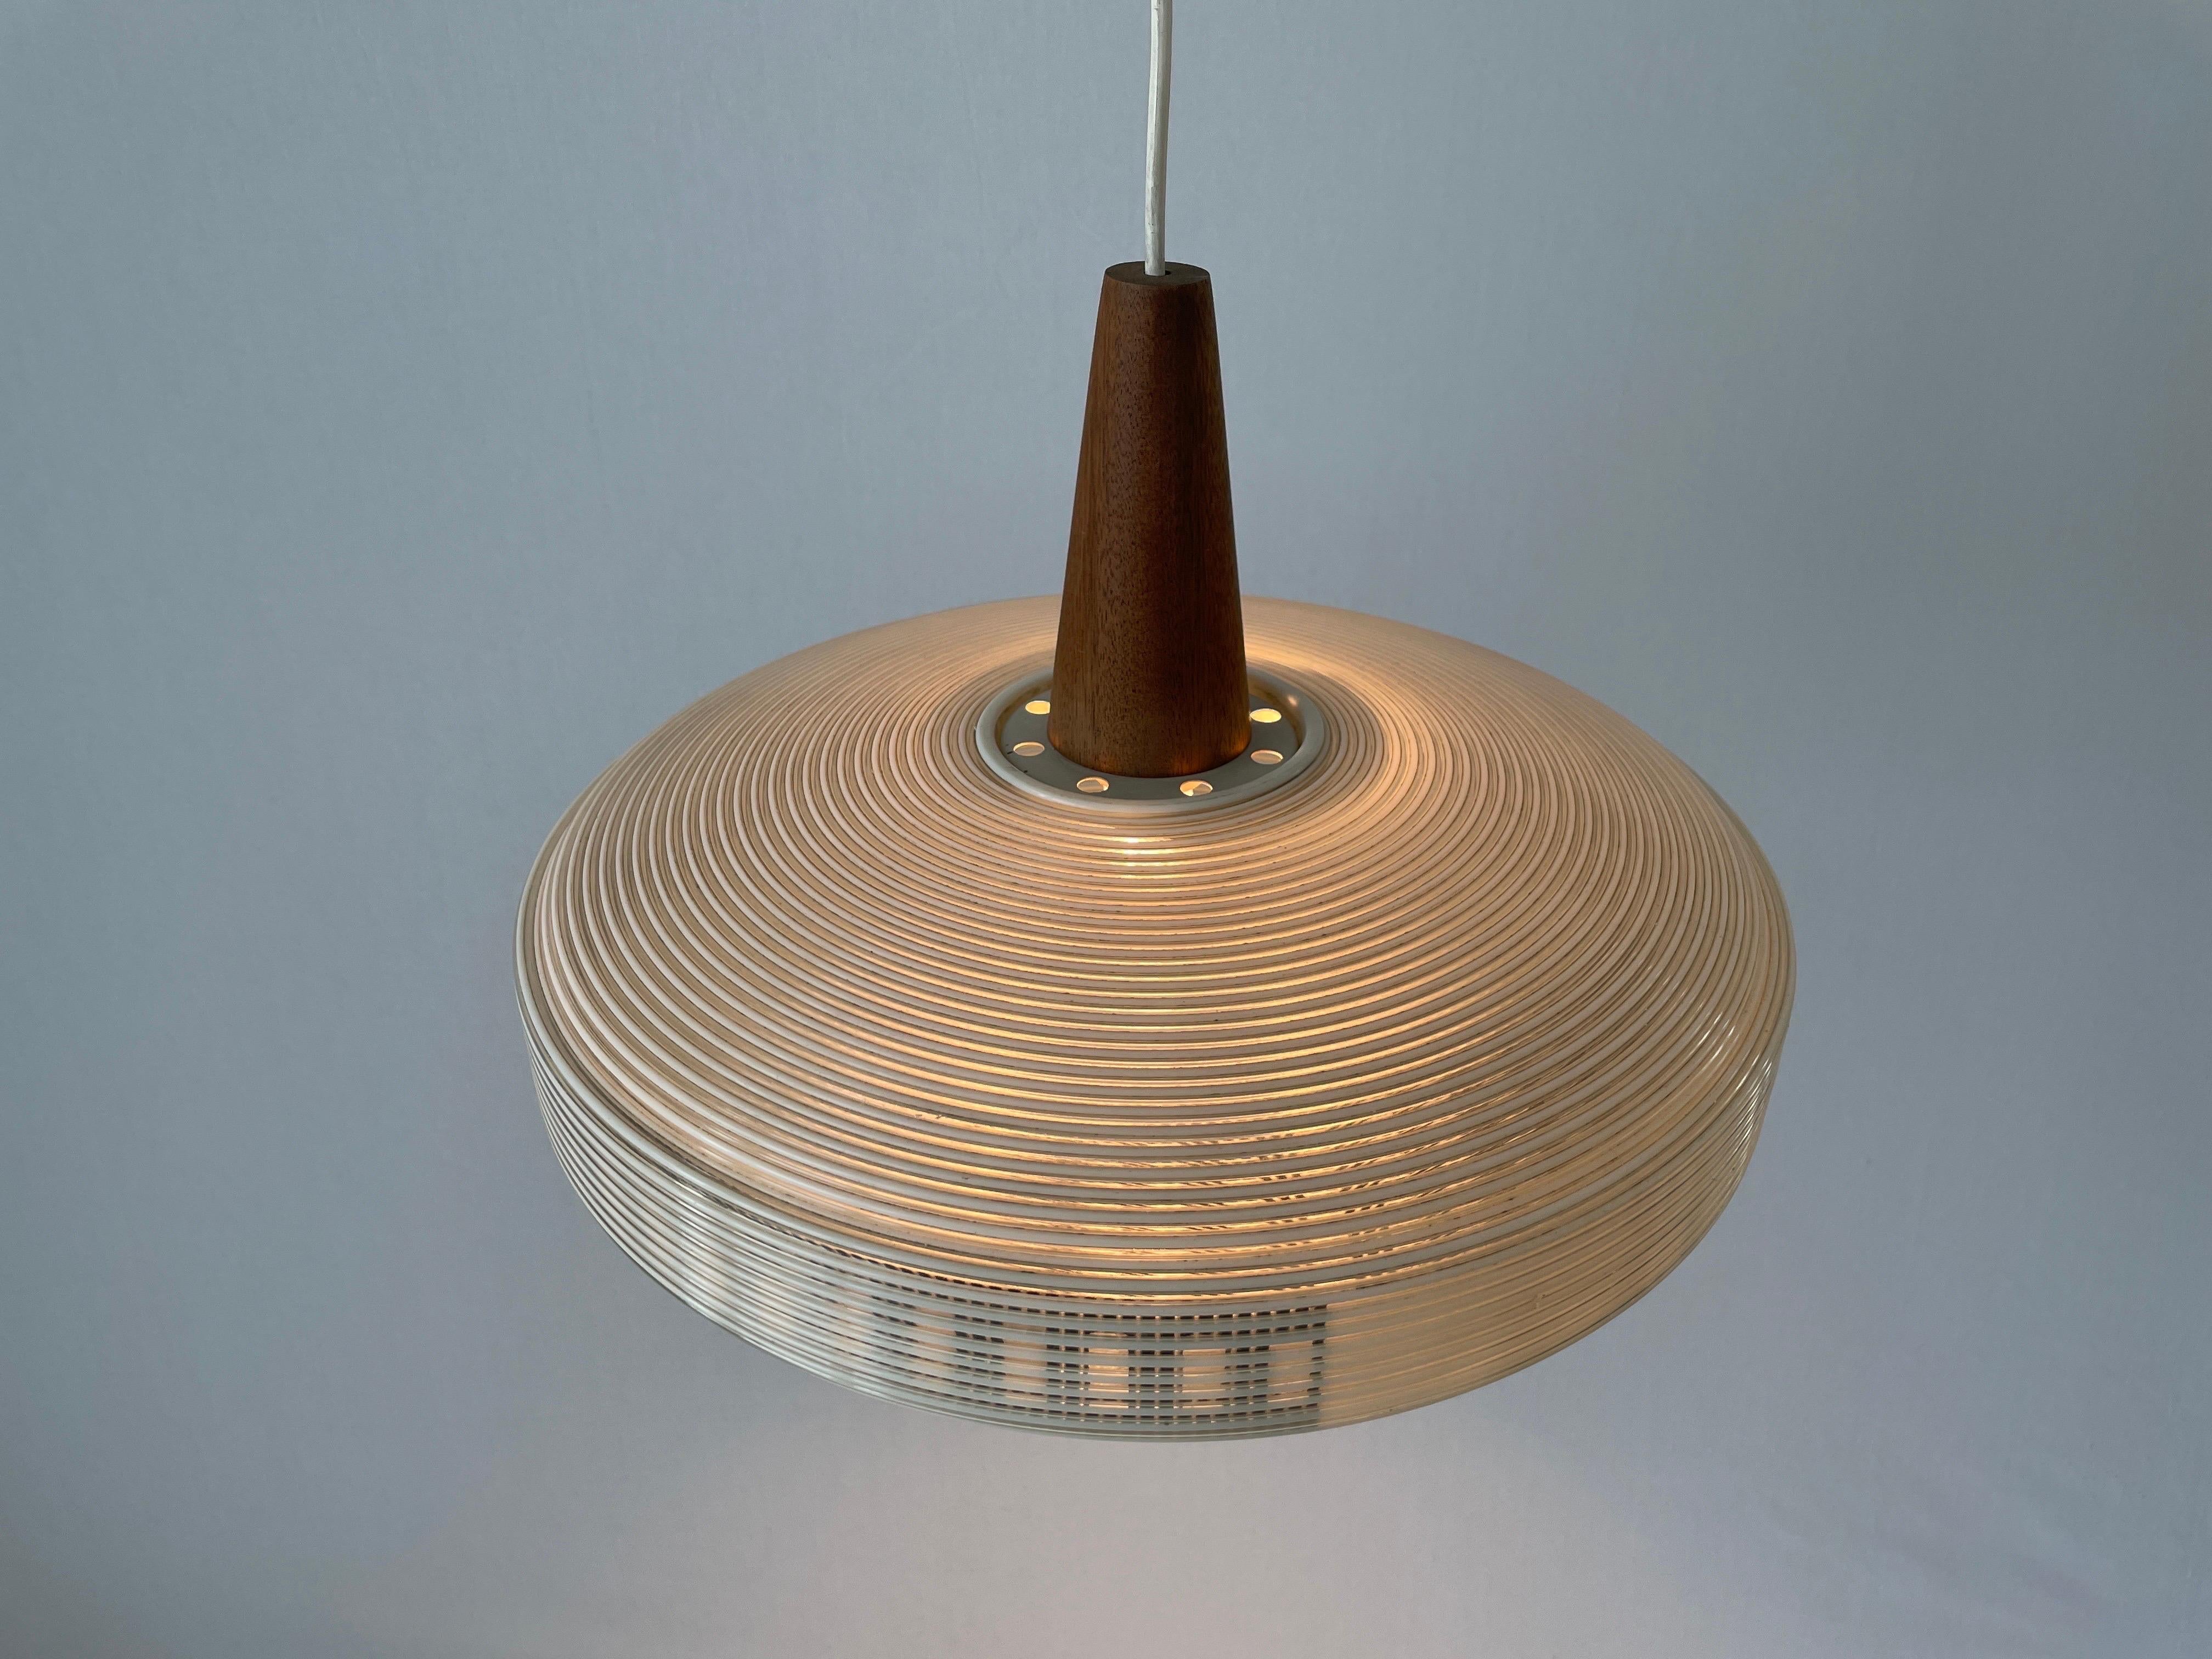 Rare Rotaflex Ceiling Lamp by Yasha Heifetz with Teak Detail, 1960s Germany For Sale 5